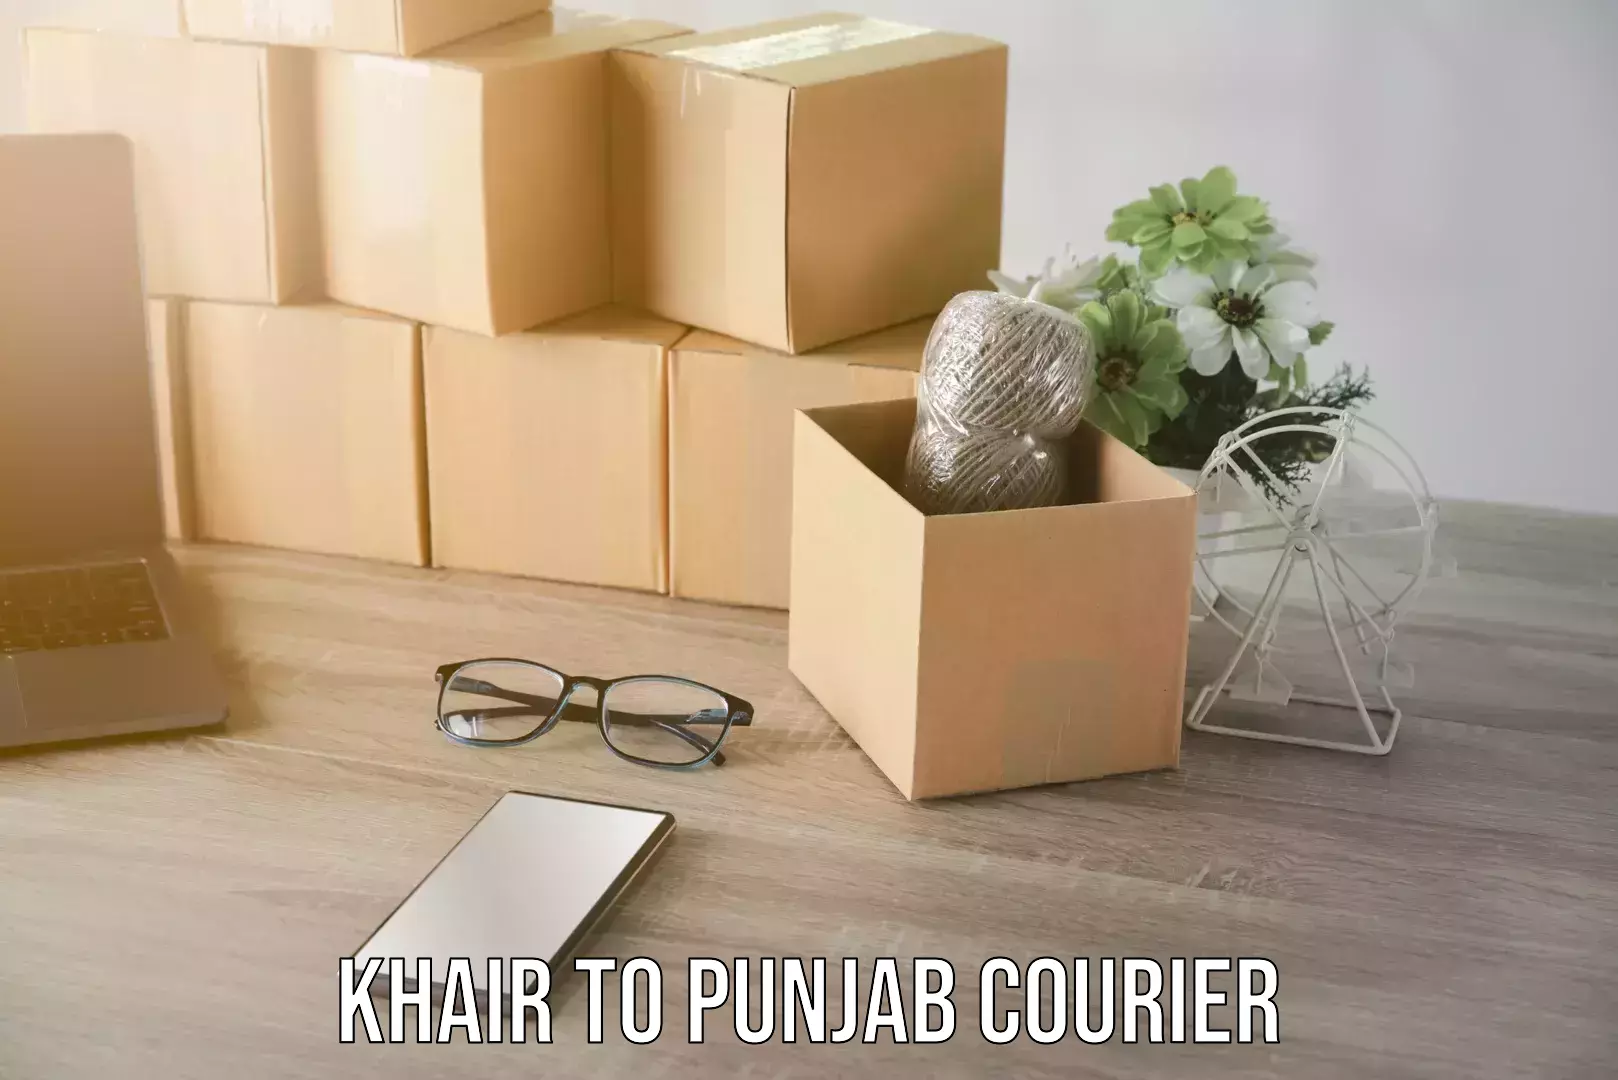 Home shifting experts in Khair to Punjab